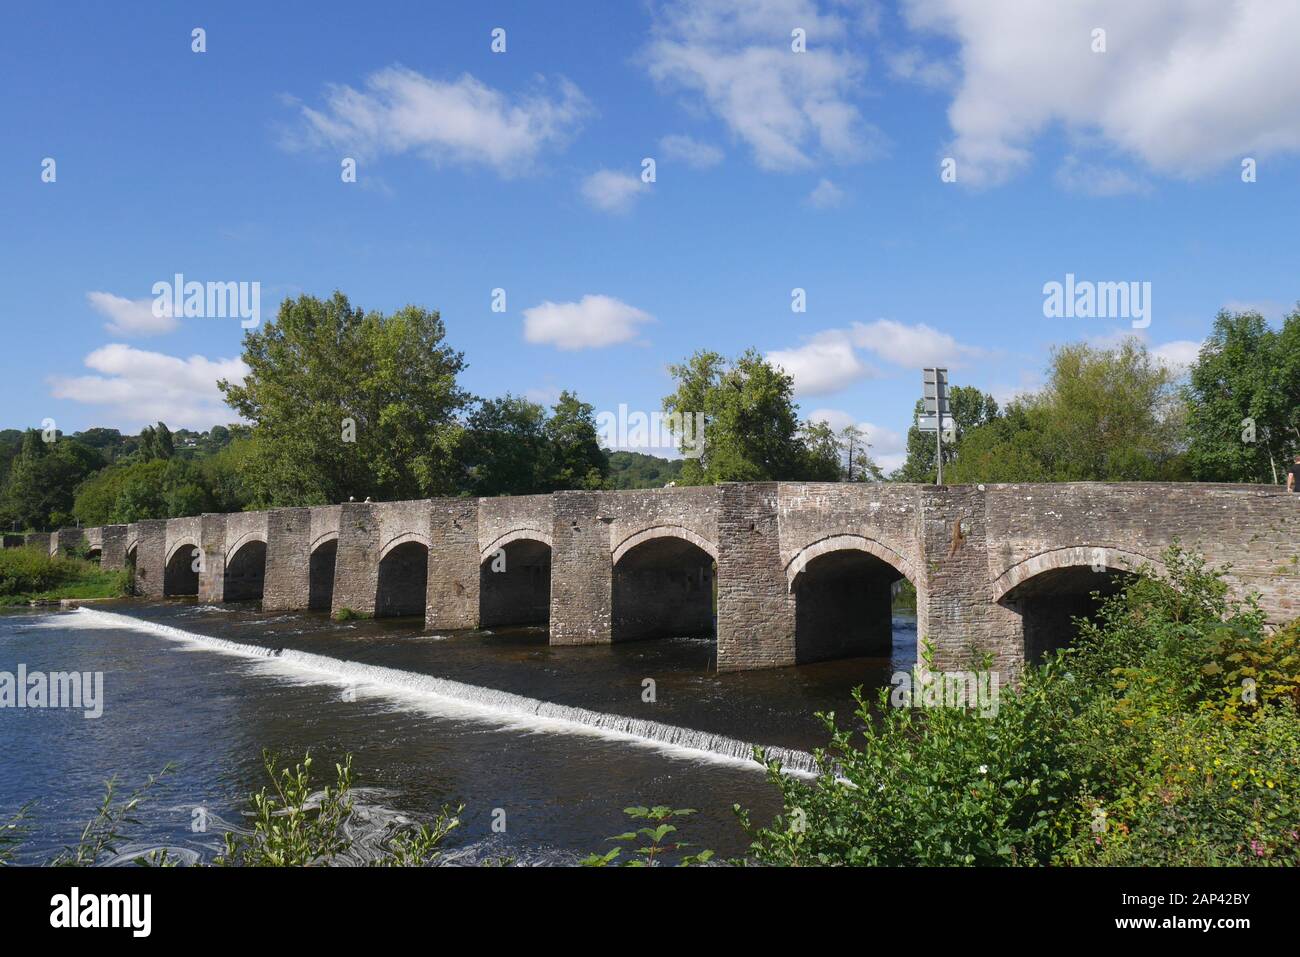 The grade 1 Listed 18th century bridge, standing above a weir, across the river Usk, in Crickhowell, Powys, Wales, United Kingdom Stock Photo